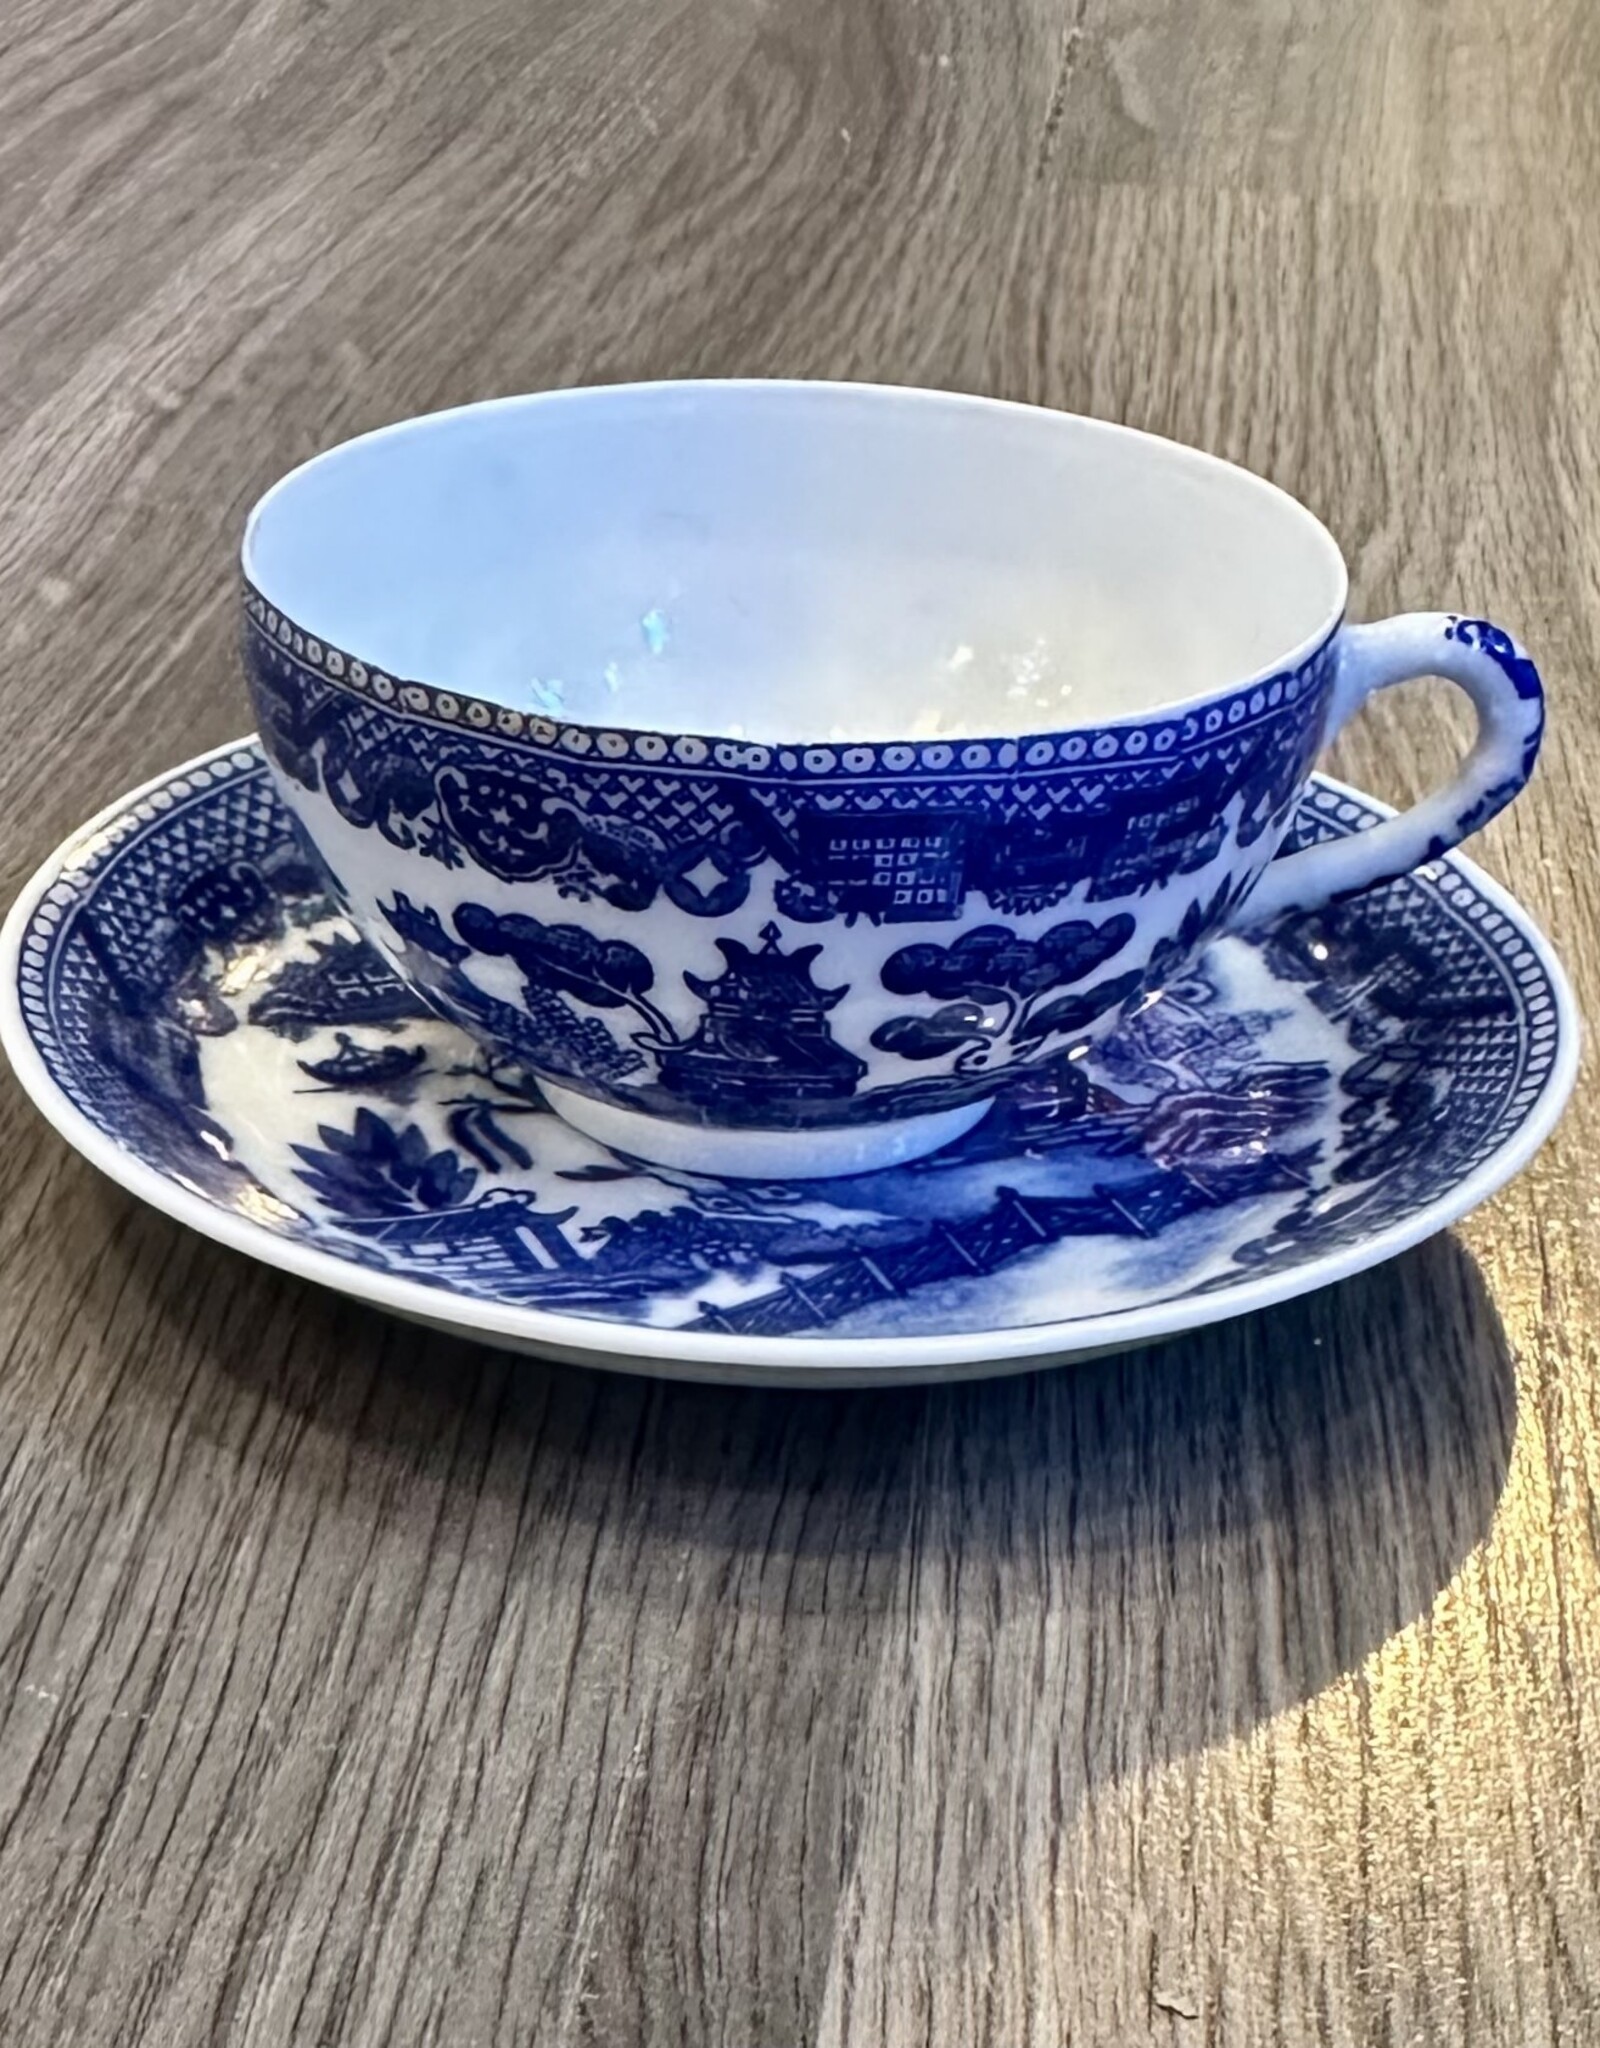 Purple Pigeon Treasures Blue Willow Lithophane Tea Cup and Saucer